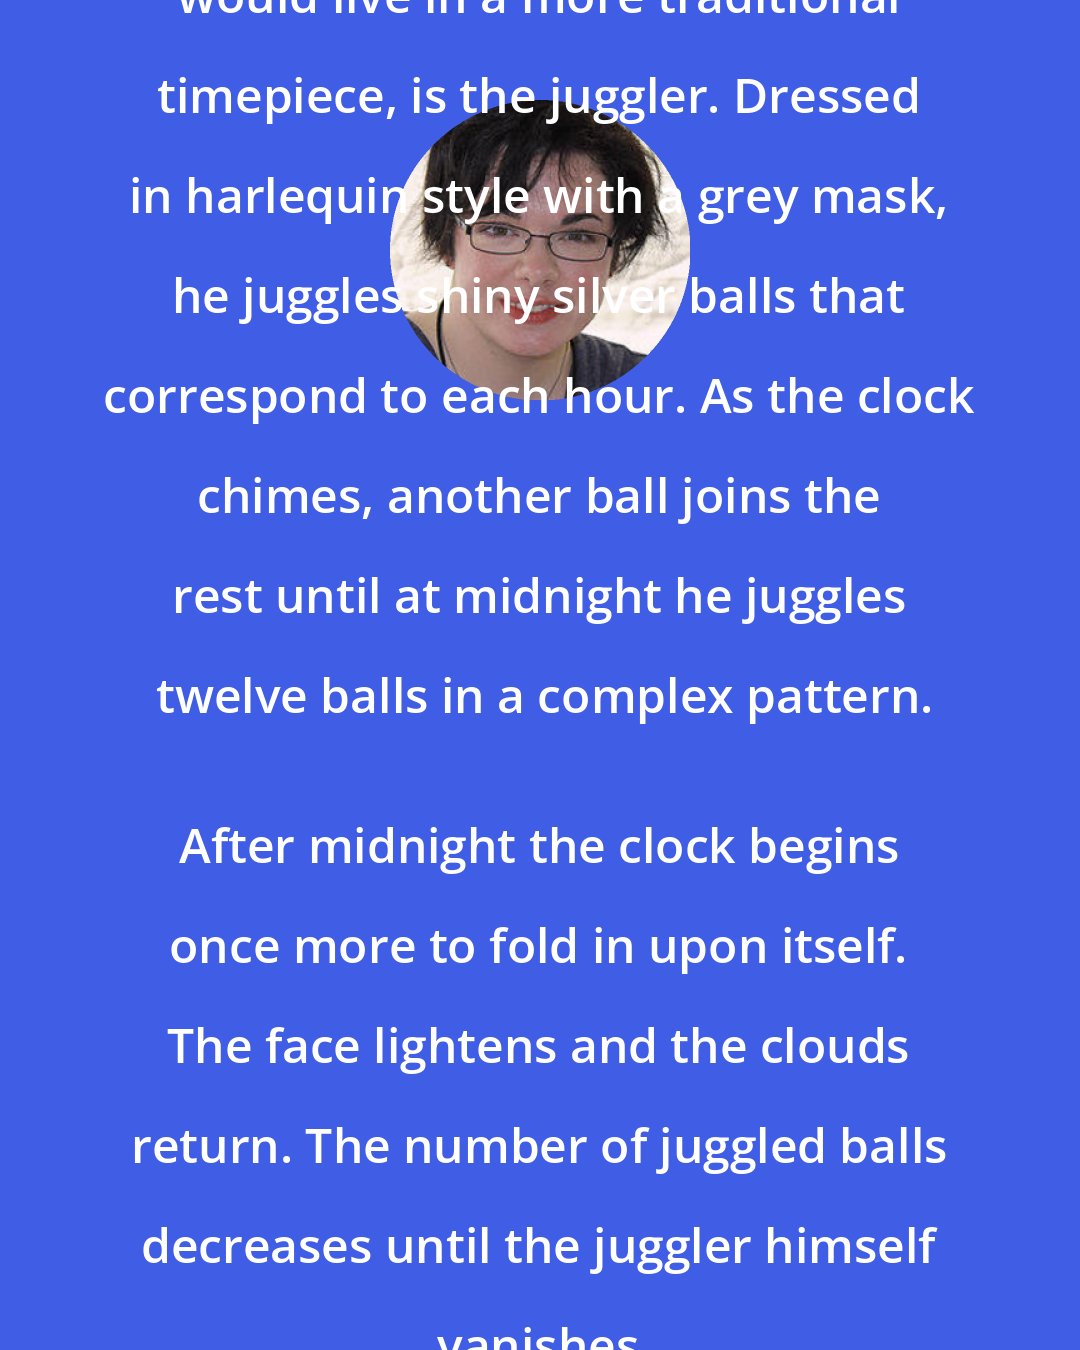 Erin Morgenstern: At the center, where a cuckoo bird would live in a more traditional timepiece, is the juggler. Dressed in harlequin style with a grey mask, he juggles shiny silver balls that correspond to each hour. As the clock chimes, another ball joins the rest until at midnight he juggles twelve balls in a complex pattern.
 After midnight the clock begins once more to fold in upon itself. The face lightens and the clouds return. The number of juggled balls decreases until the juggler himself vanishes.
 By noon it is a clock again, and no longer a dream.